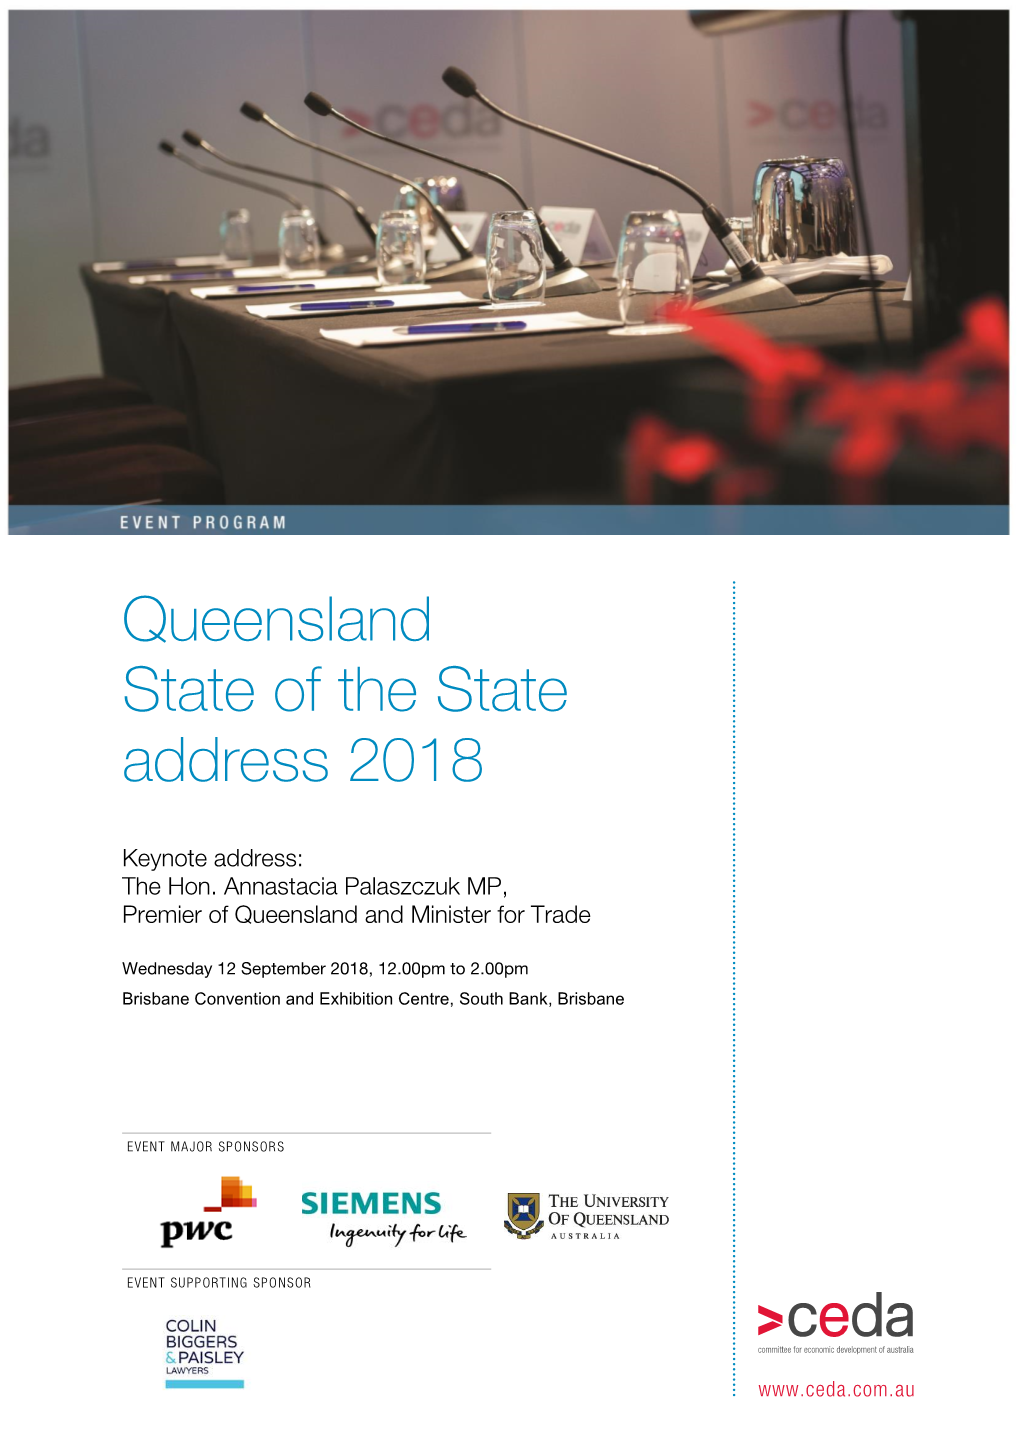 Queensland State of the State Address 2018